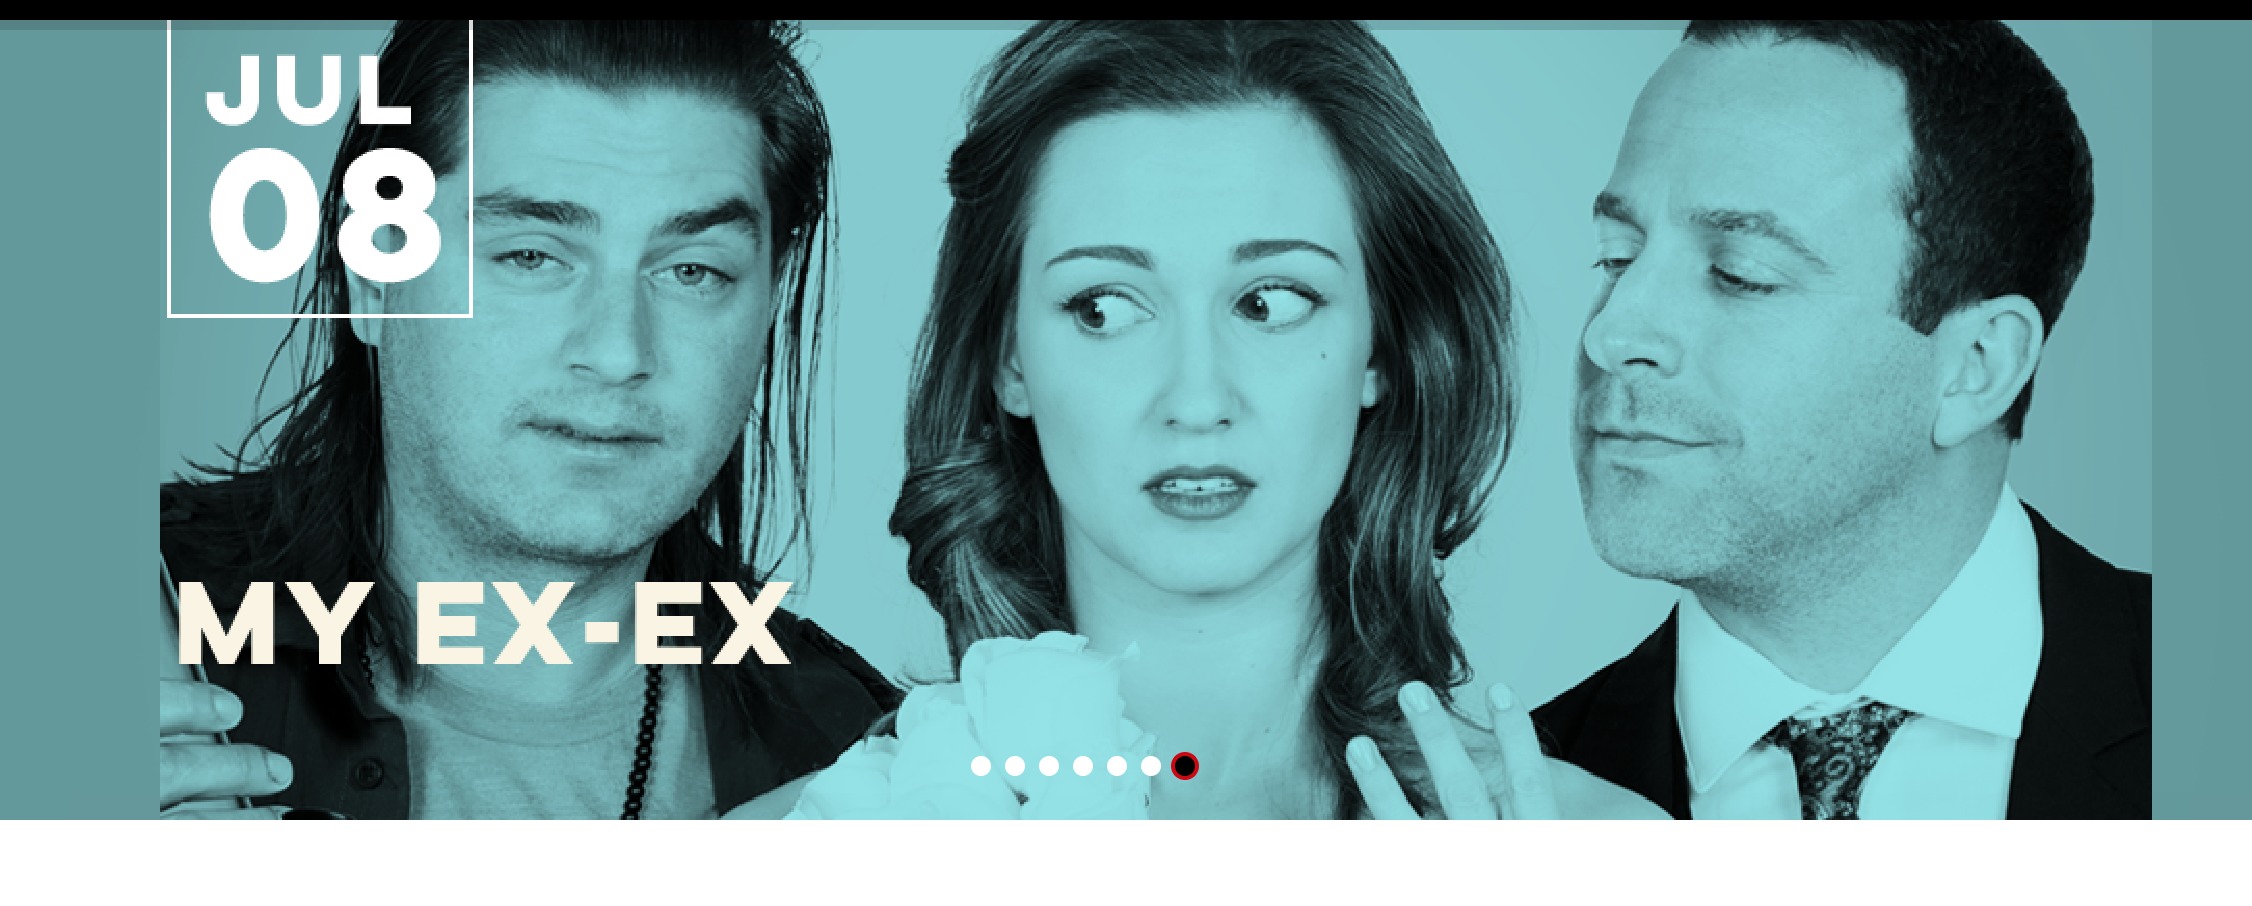 'My ExEx' Opens in Cinemas July 8, 2015 with Andre Baharti and Ray Galletti